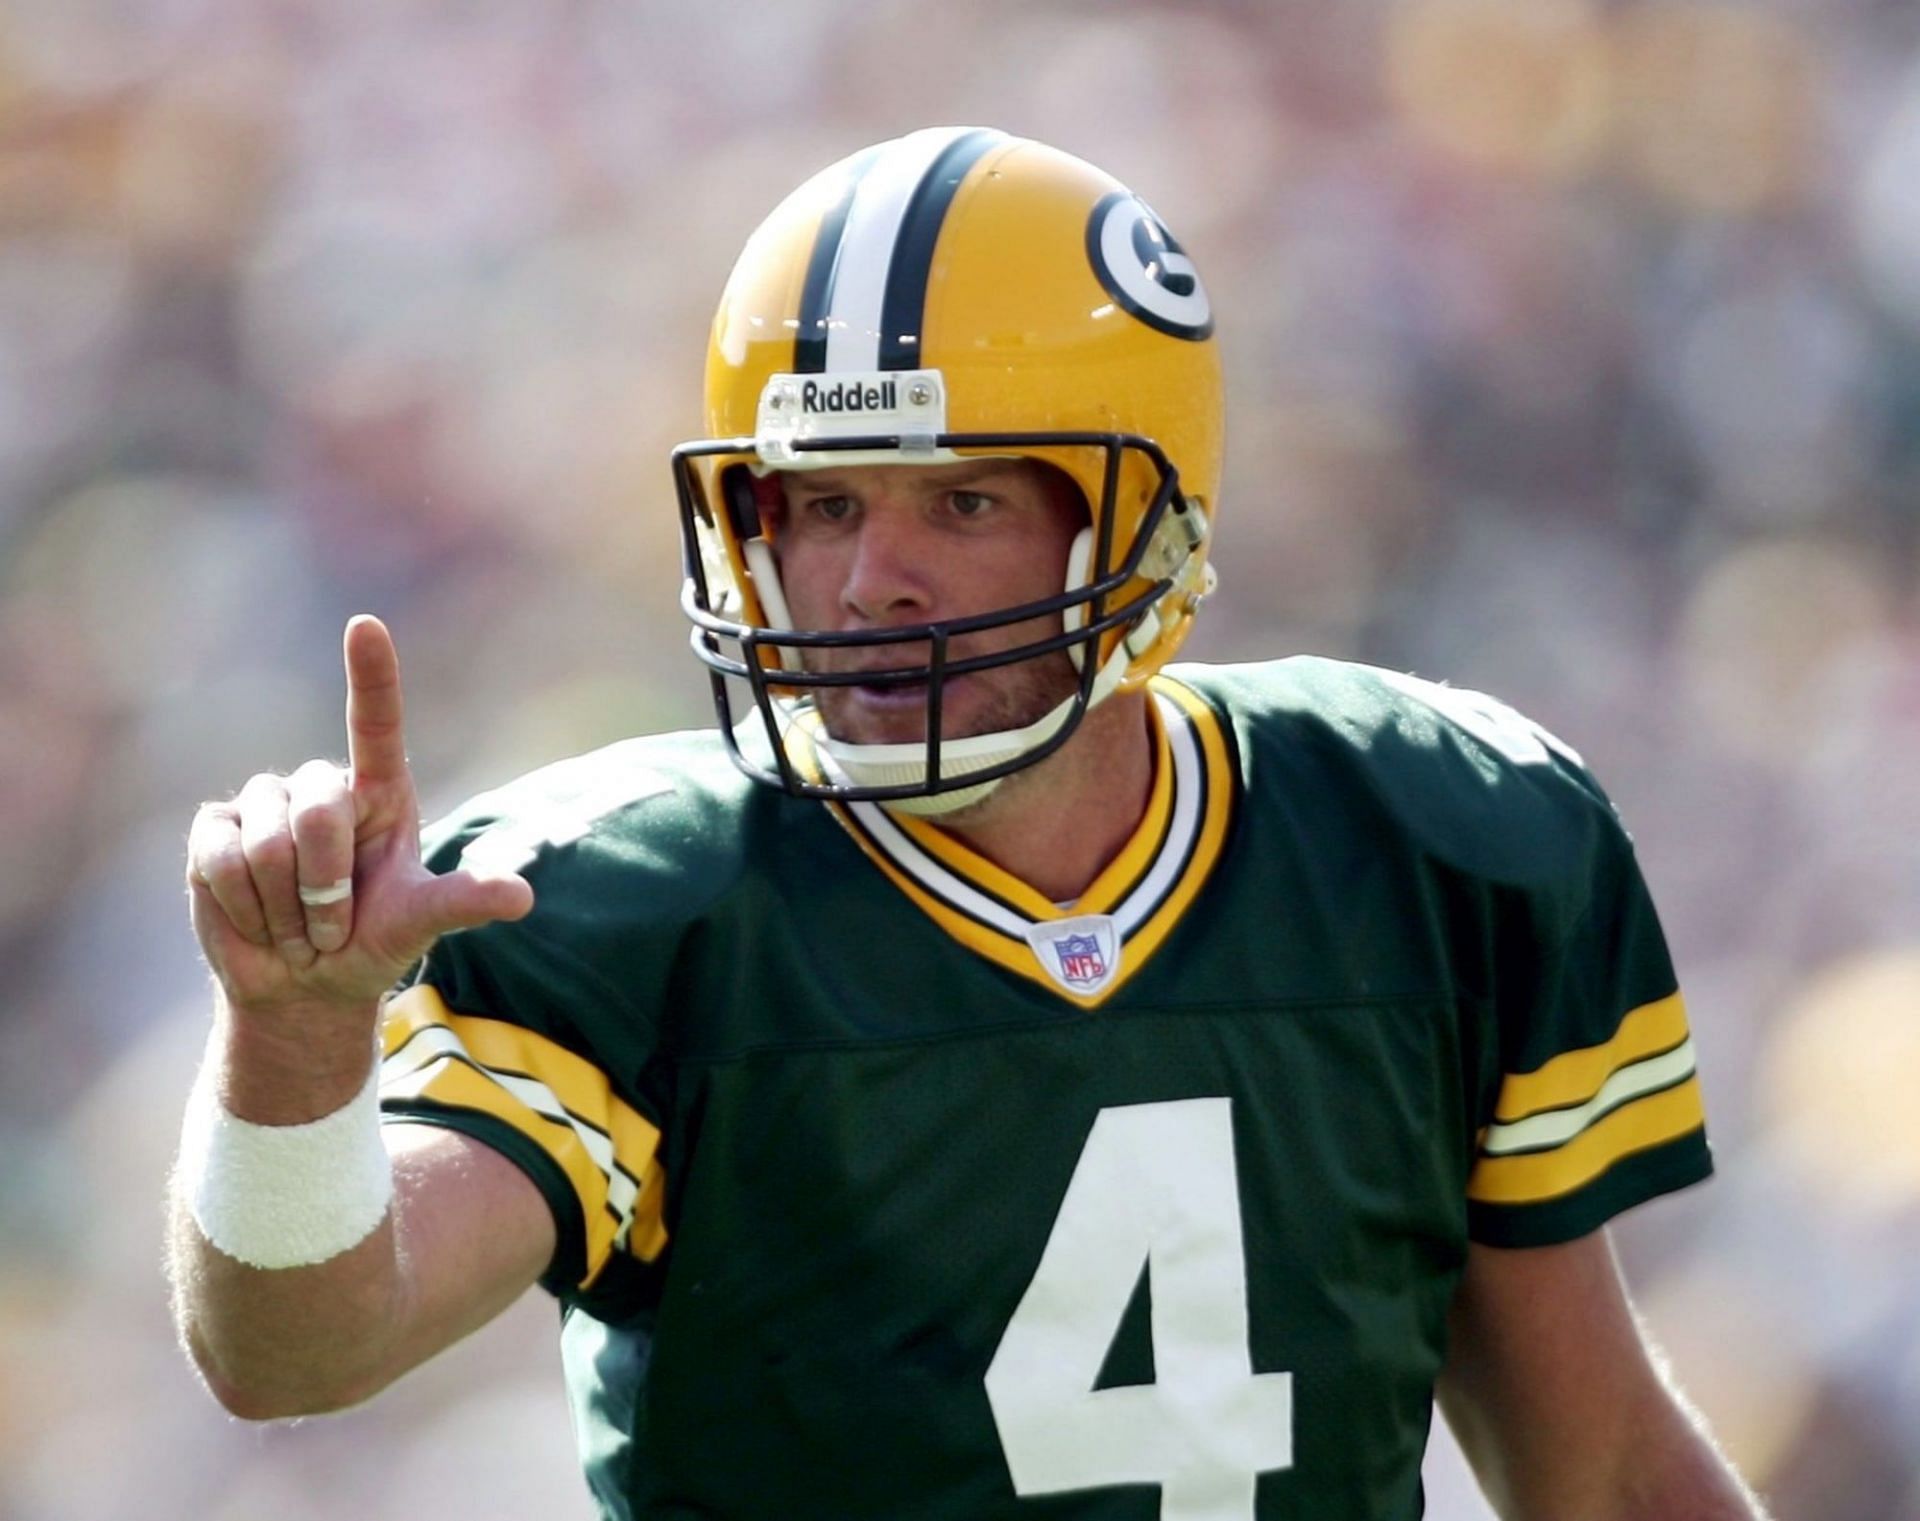 Brett Favre playing for the Green Bay Packers